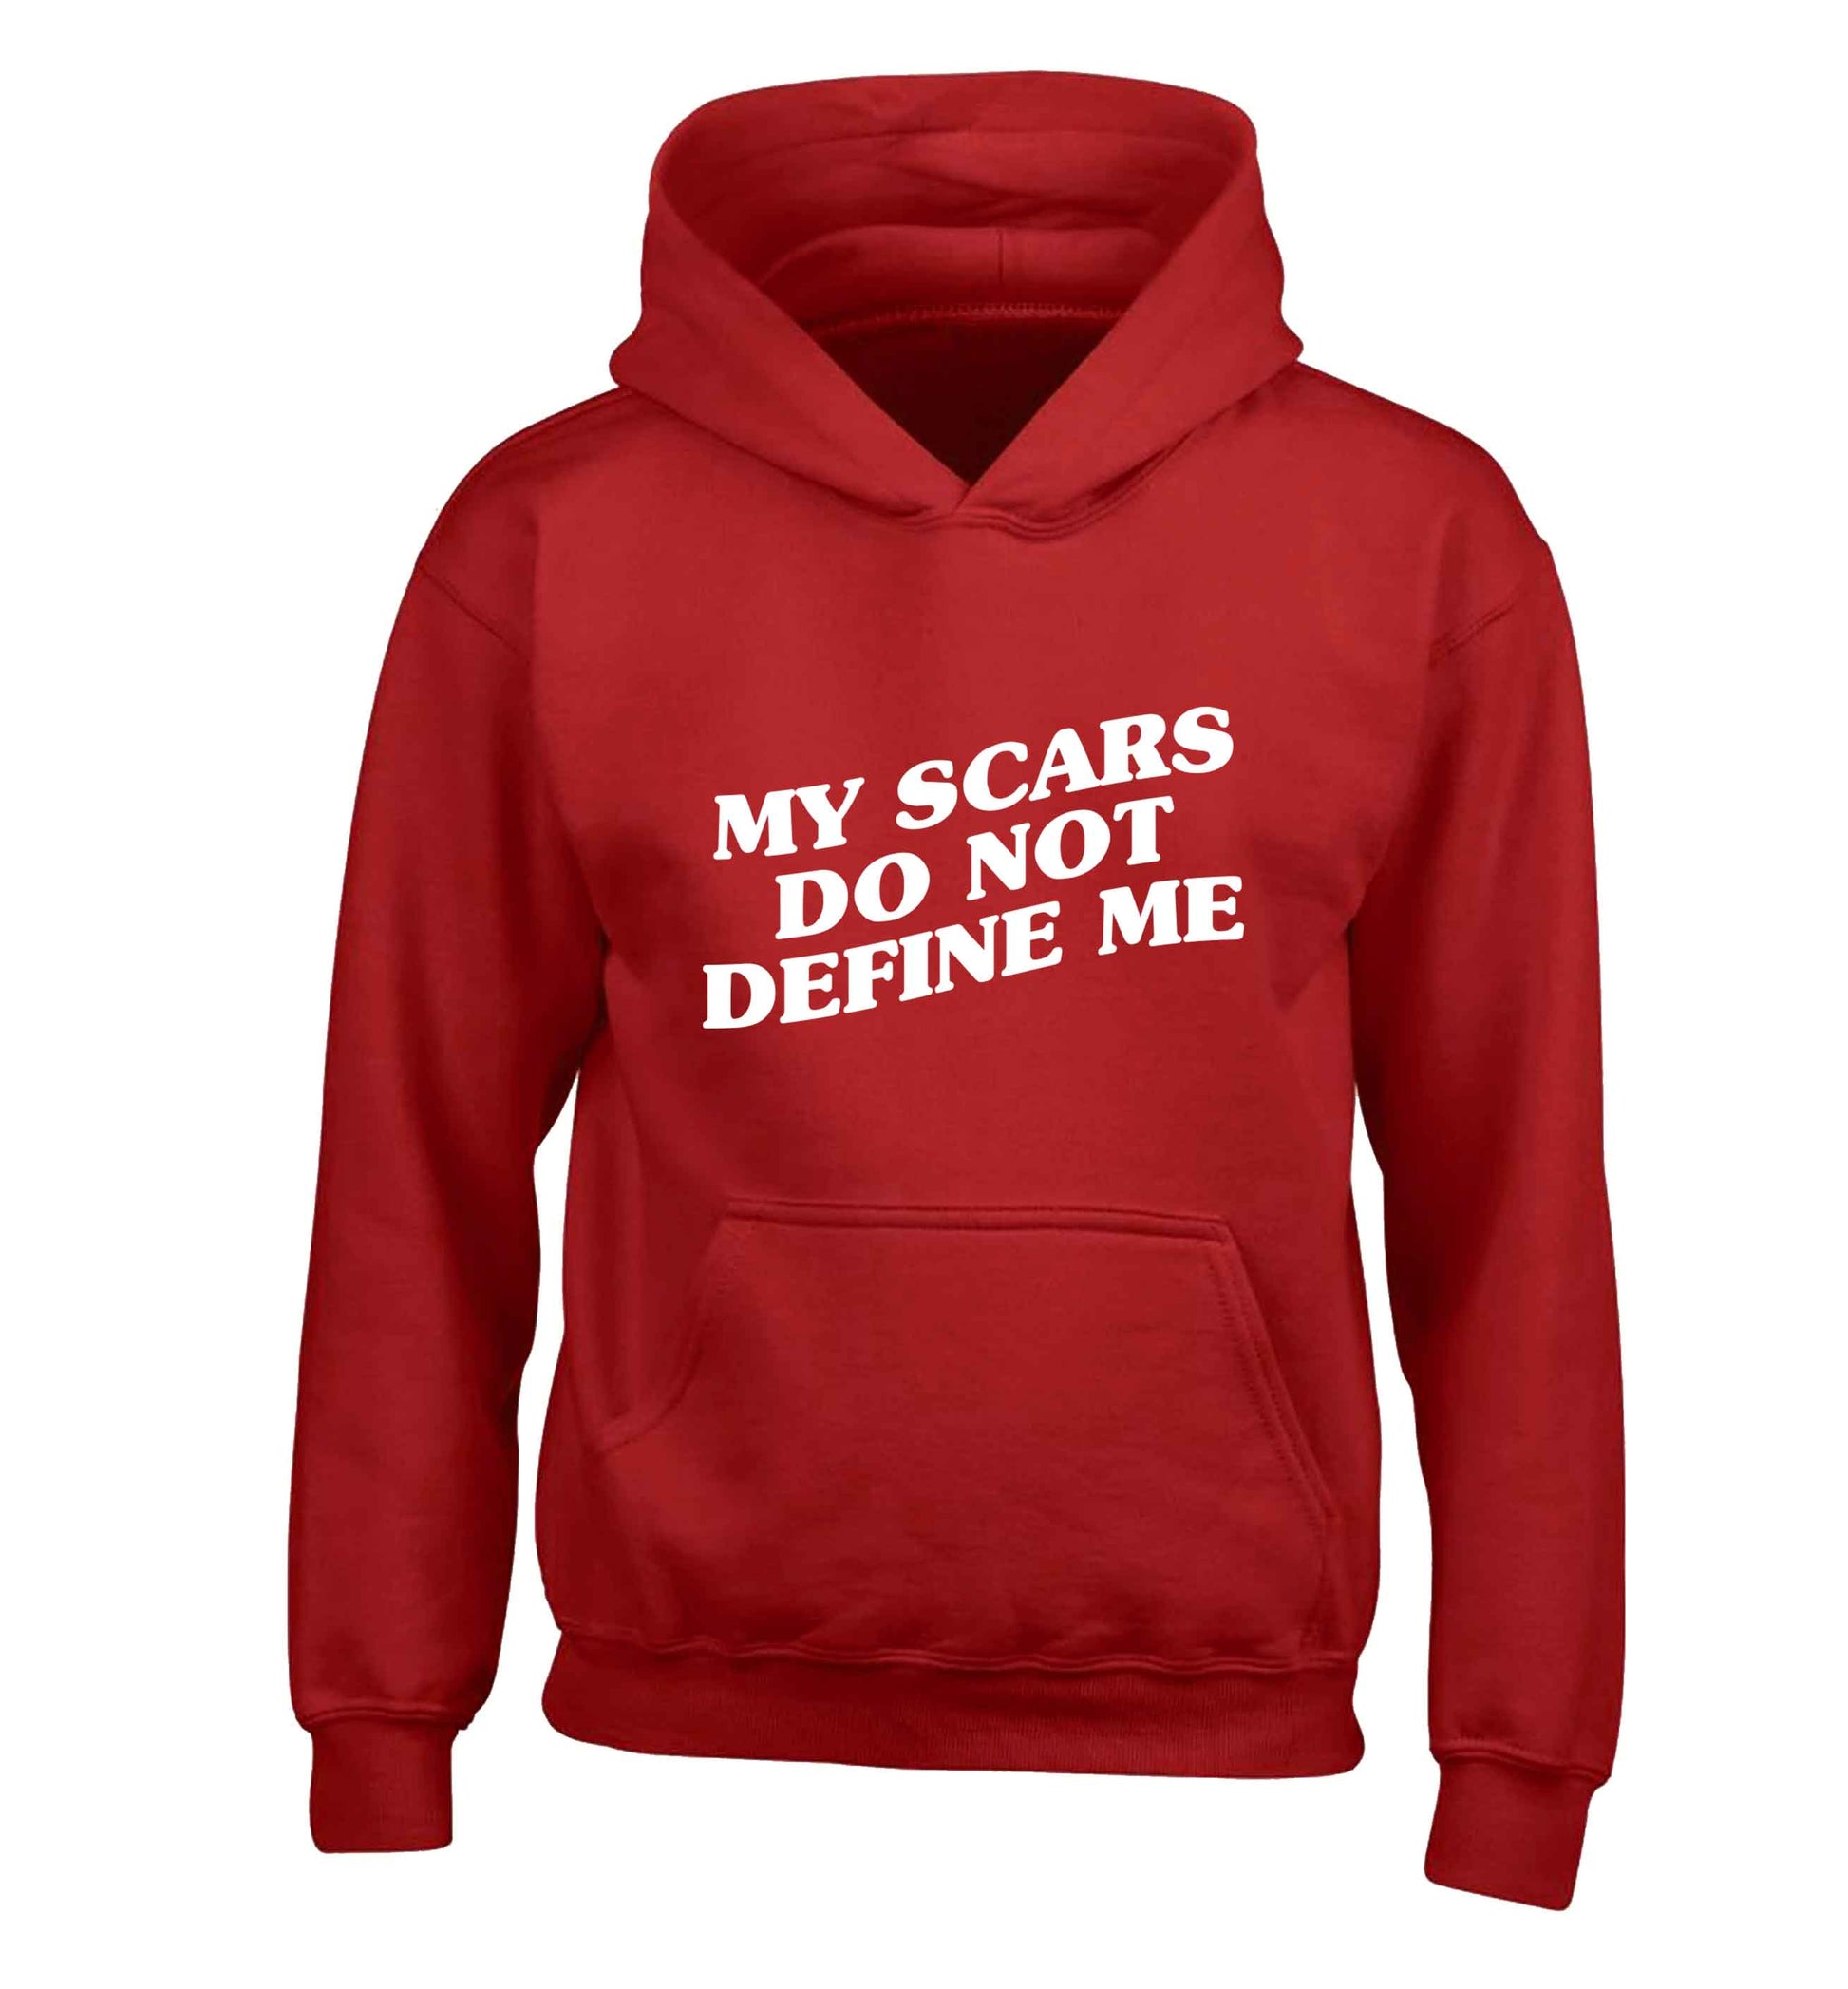 My scars do not define me children's red hoodie 12-13 Years